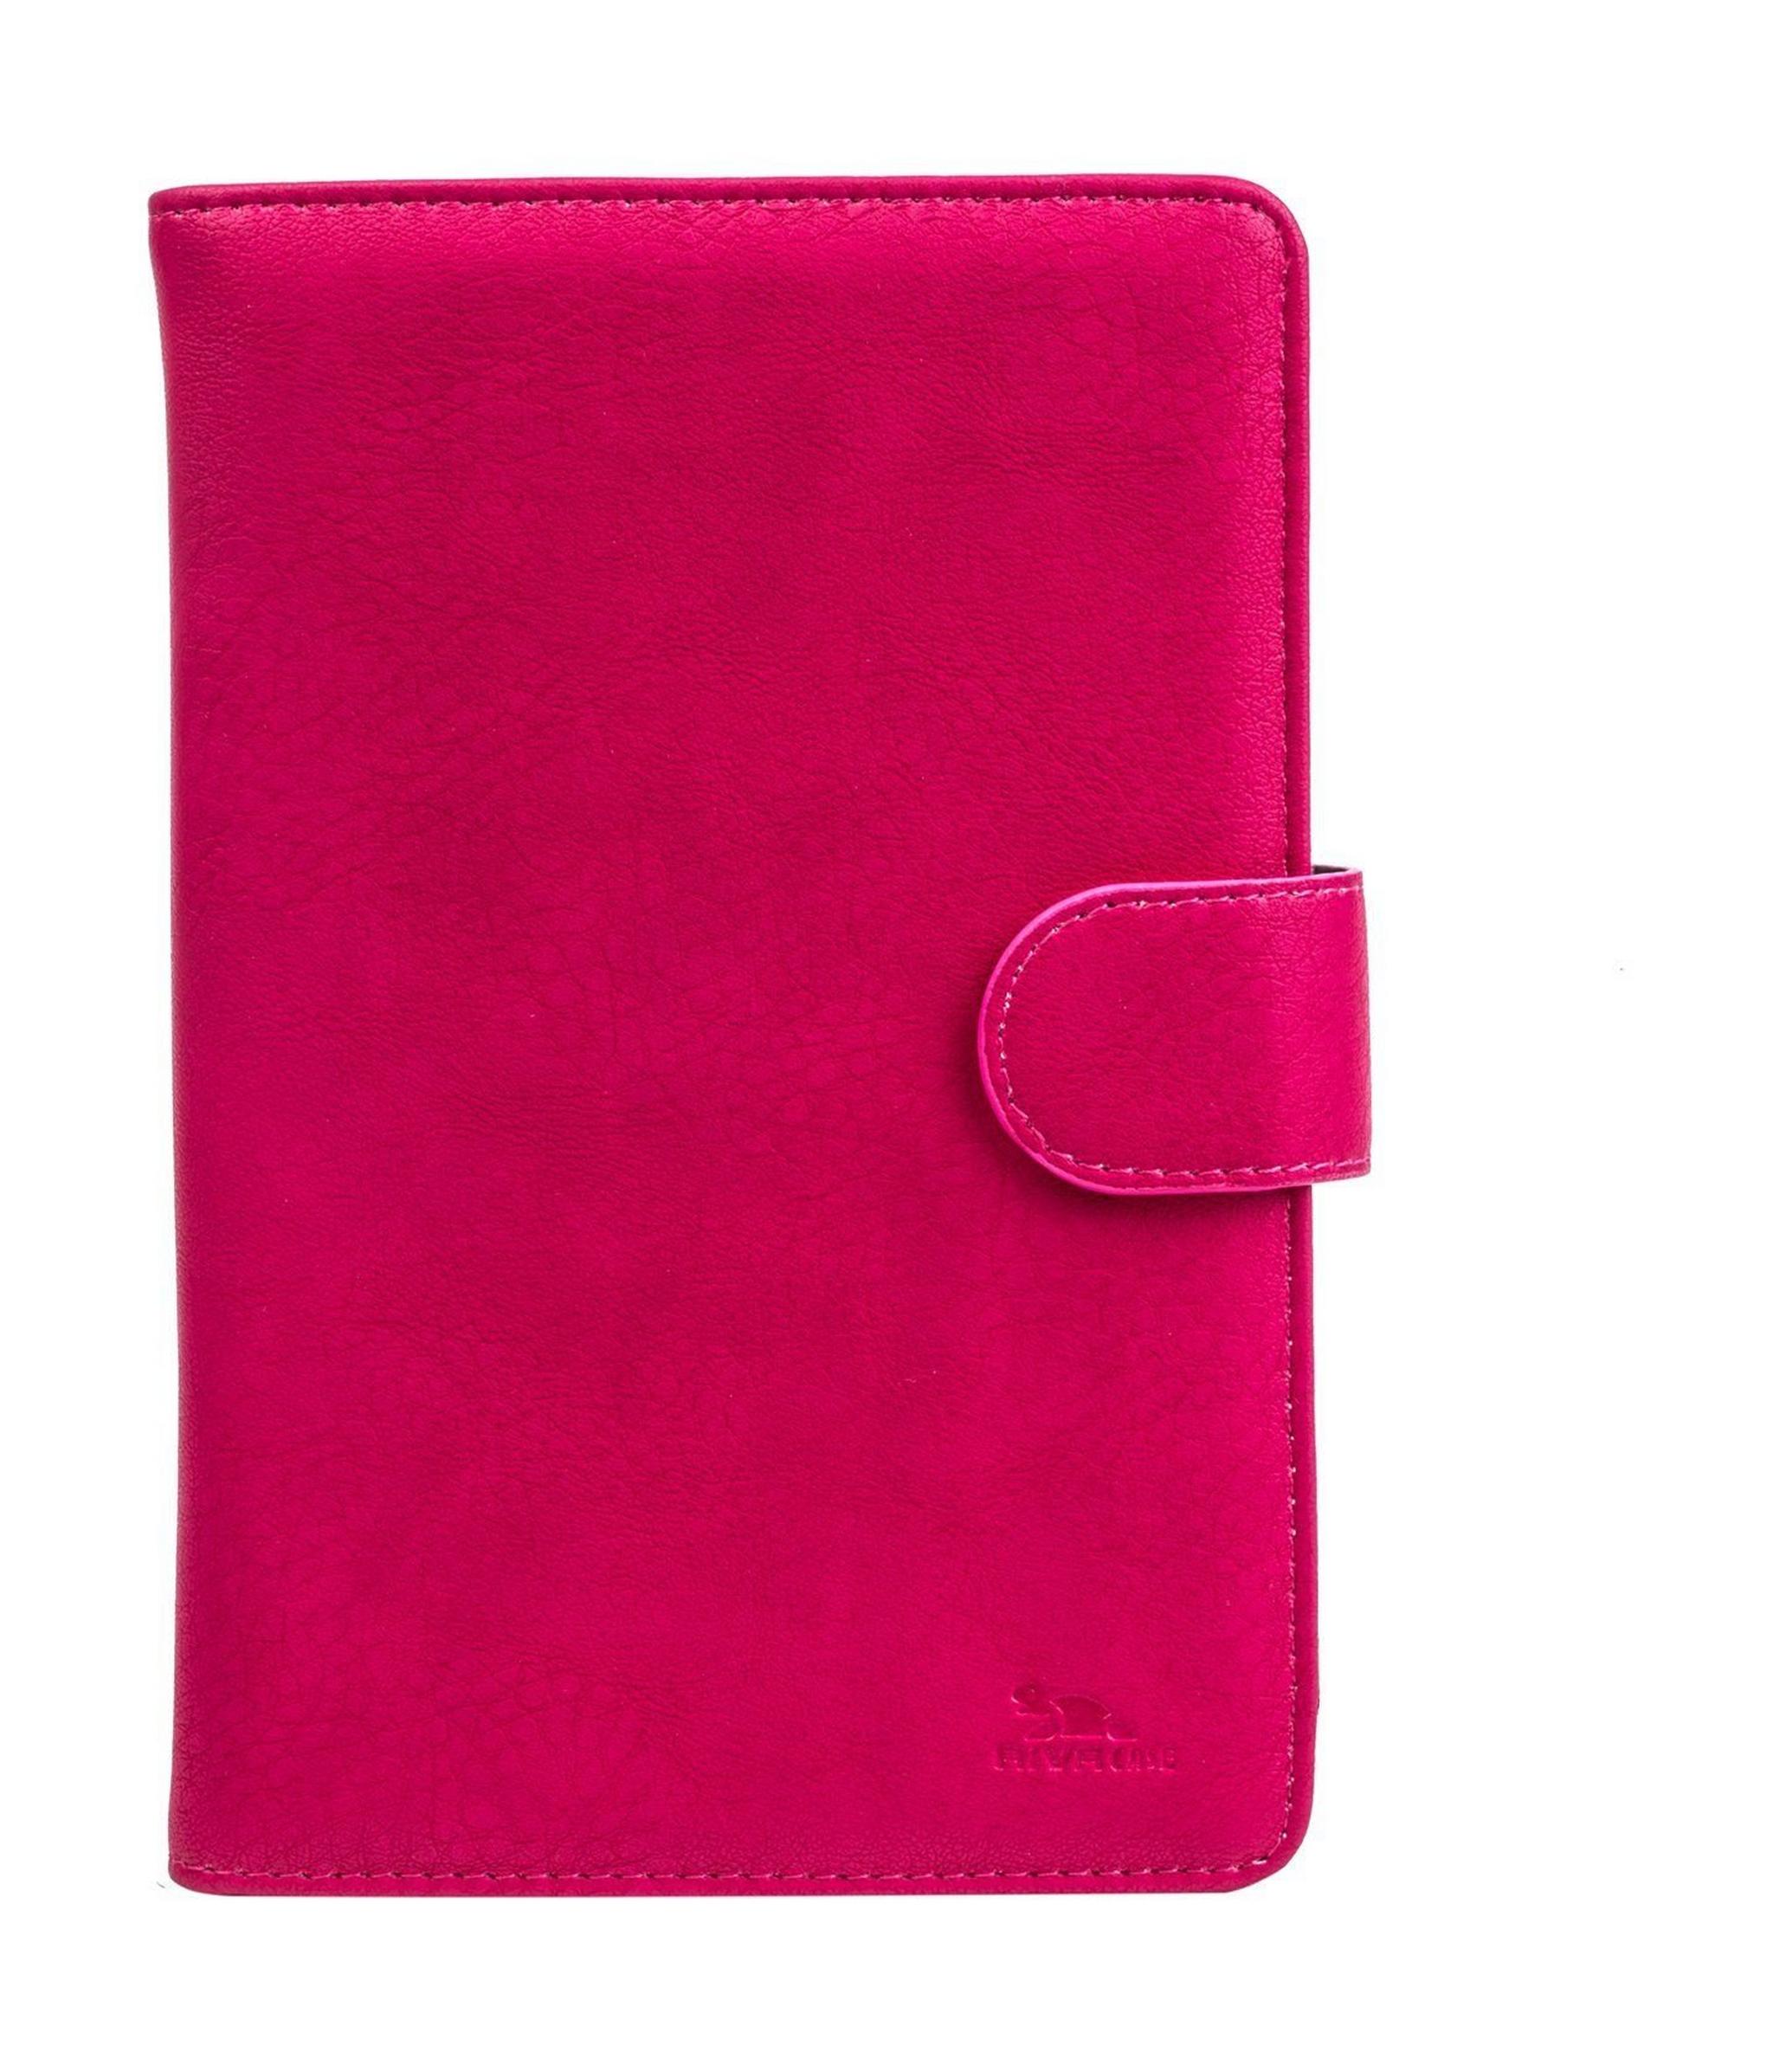 RivaCase Protective Case for 10 inch Tablet, 3017 - Pink